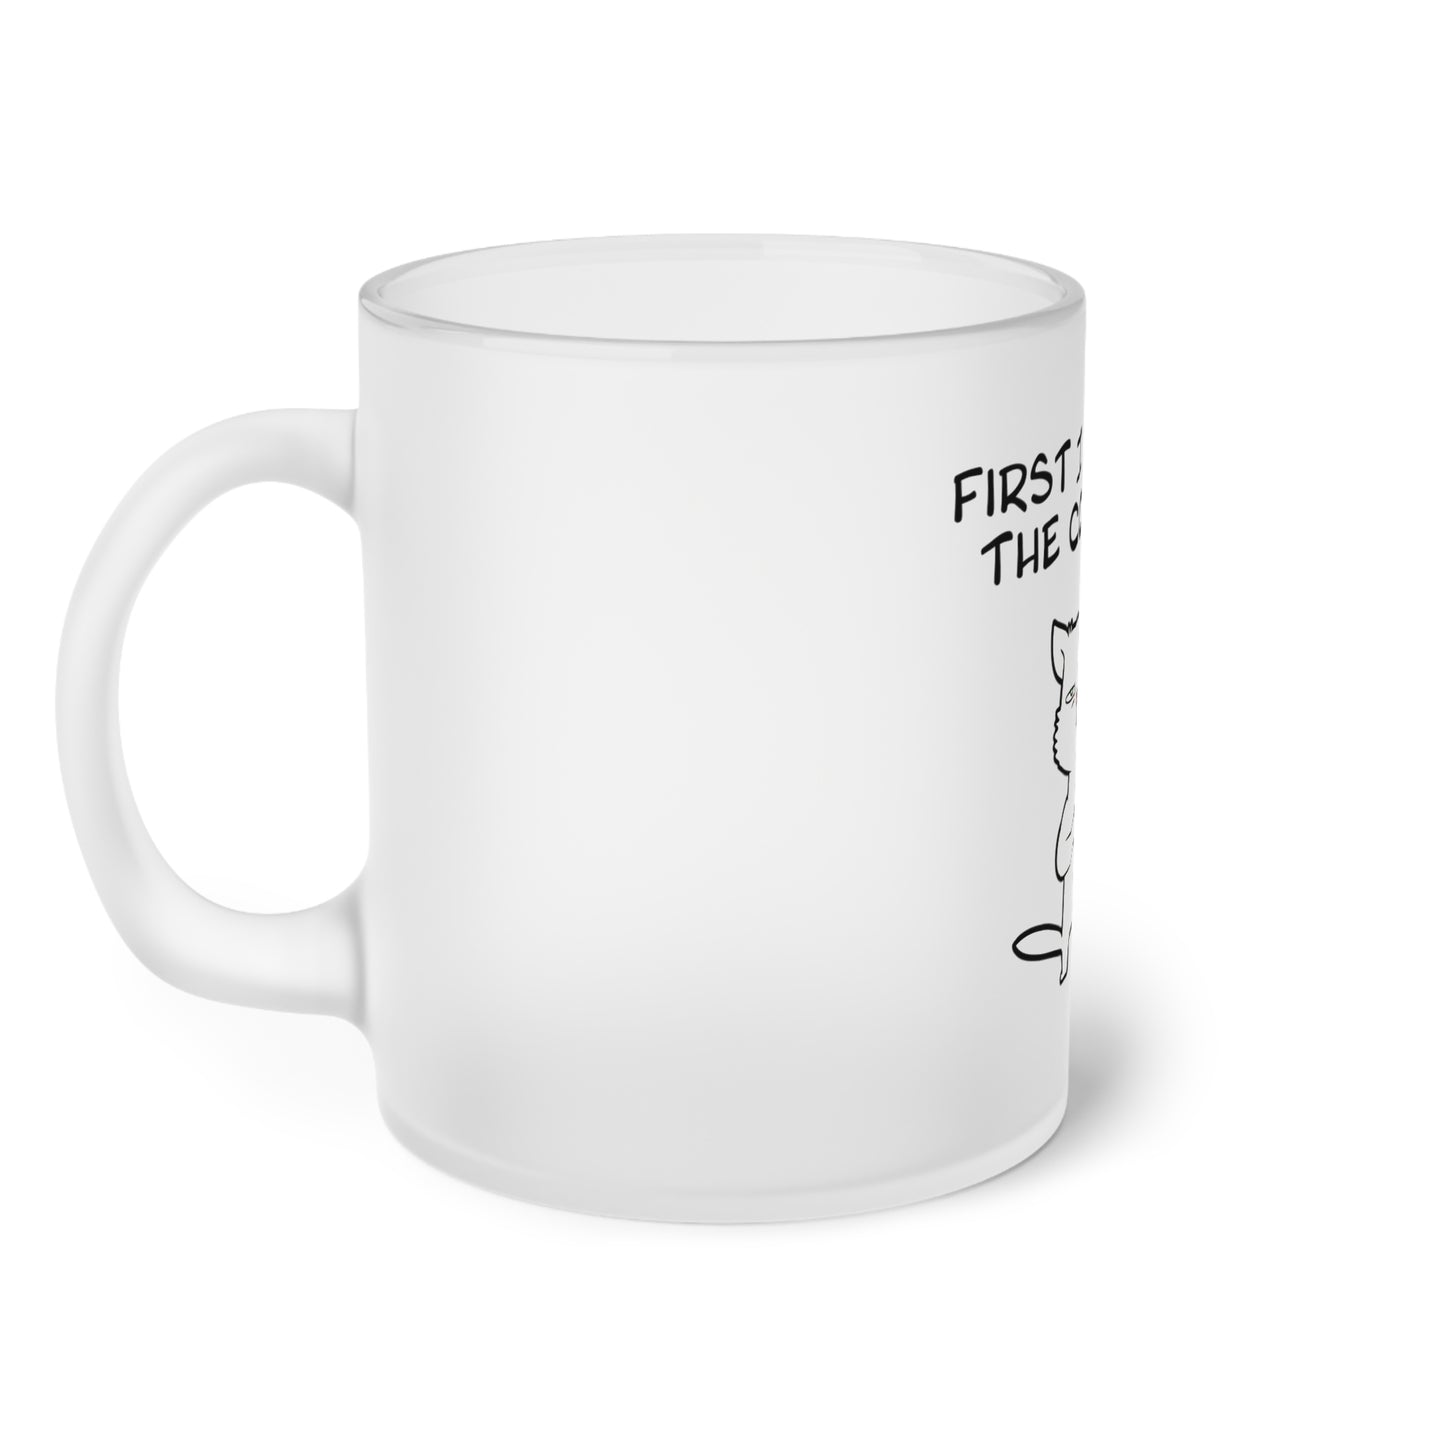 Cat Drinking Coffee To Kick Start The day and Do Things. Frosted Glass Mug